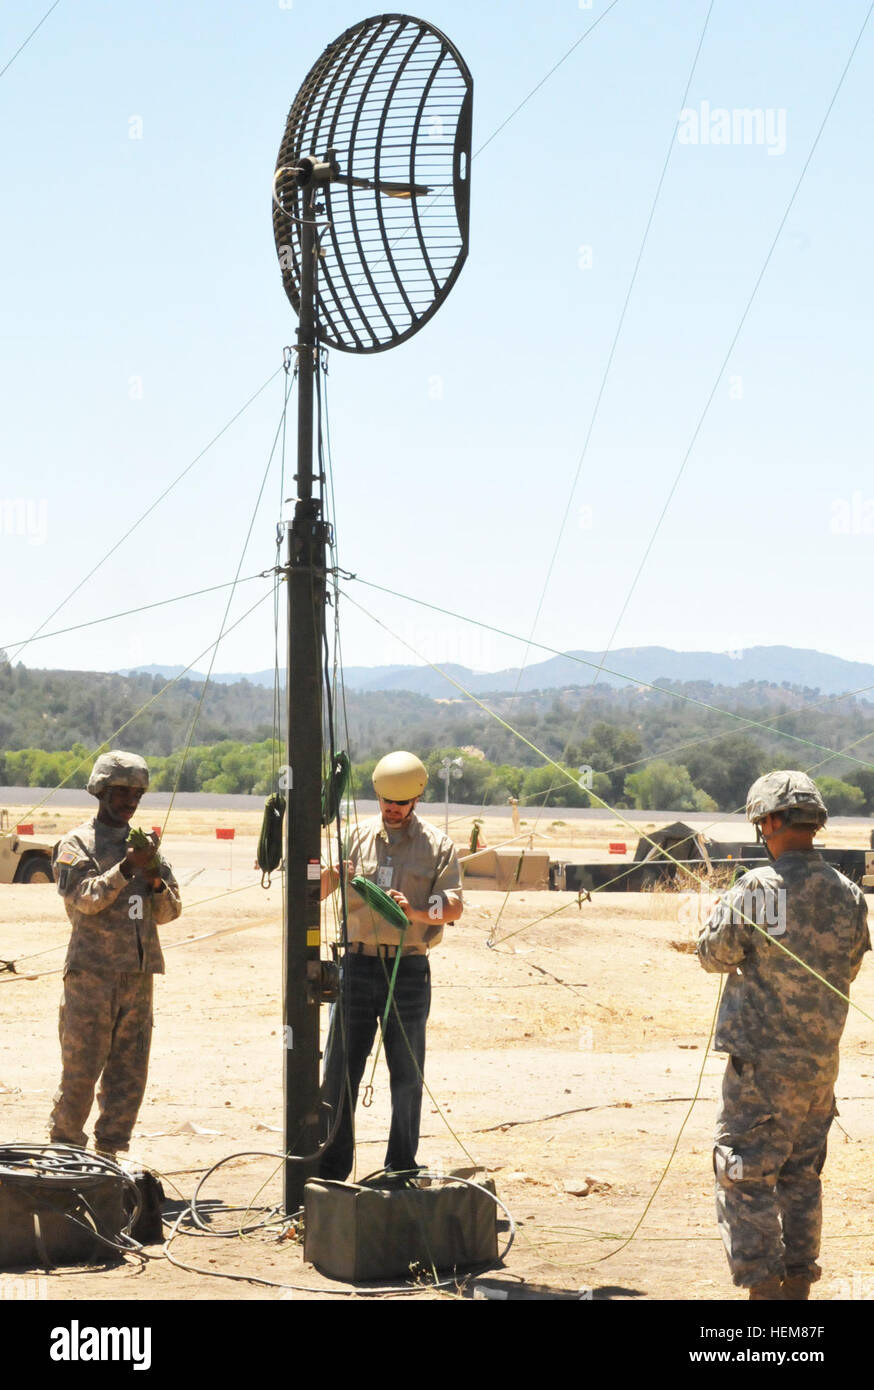 Spc. Cedric Alston (left) and Pfc. William Kim, 392nd Expeditionary Signal Battalion soldiers, help Bradley Baldwin, a Department of the Army logistics assistant representative, dismantle a high-capacity line-of-sight antenna during Exercise Grecian Firebolt at Fort Hunter Liggett, Calif. Grecian Firebolt 2012 640897 Stock Photo